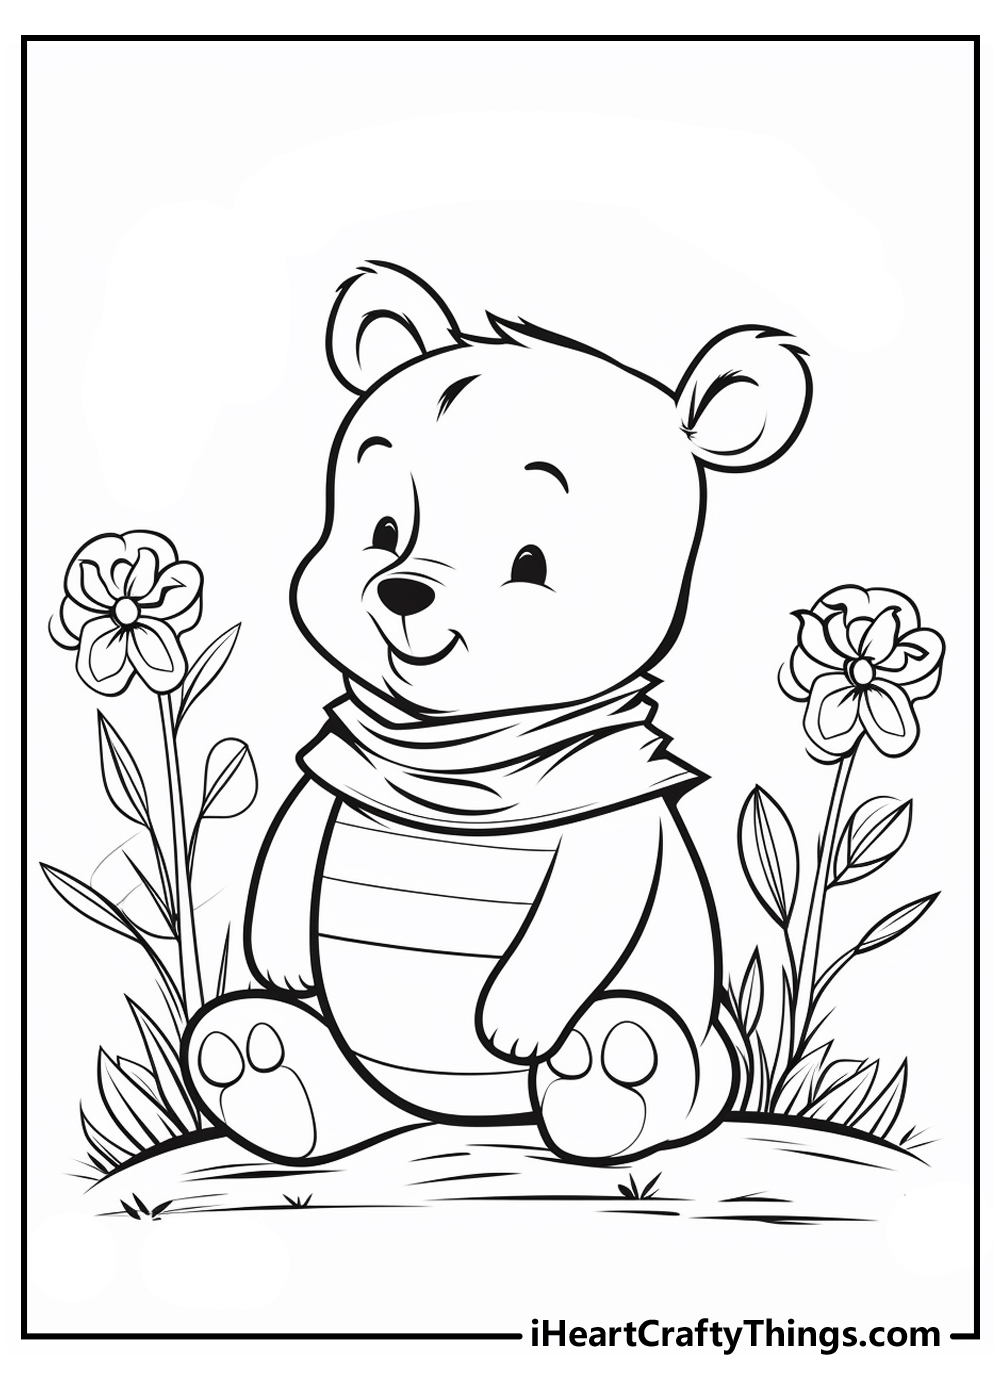 Winnie the pooh coloring pages free printables